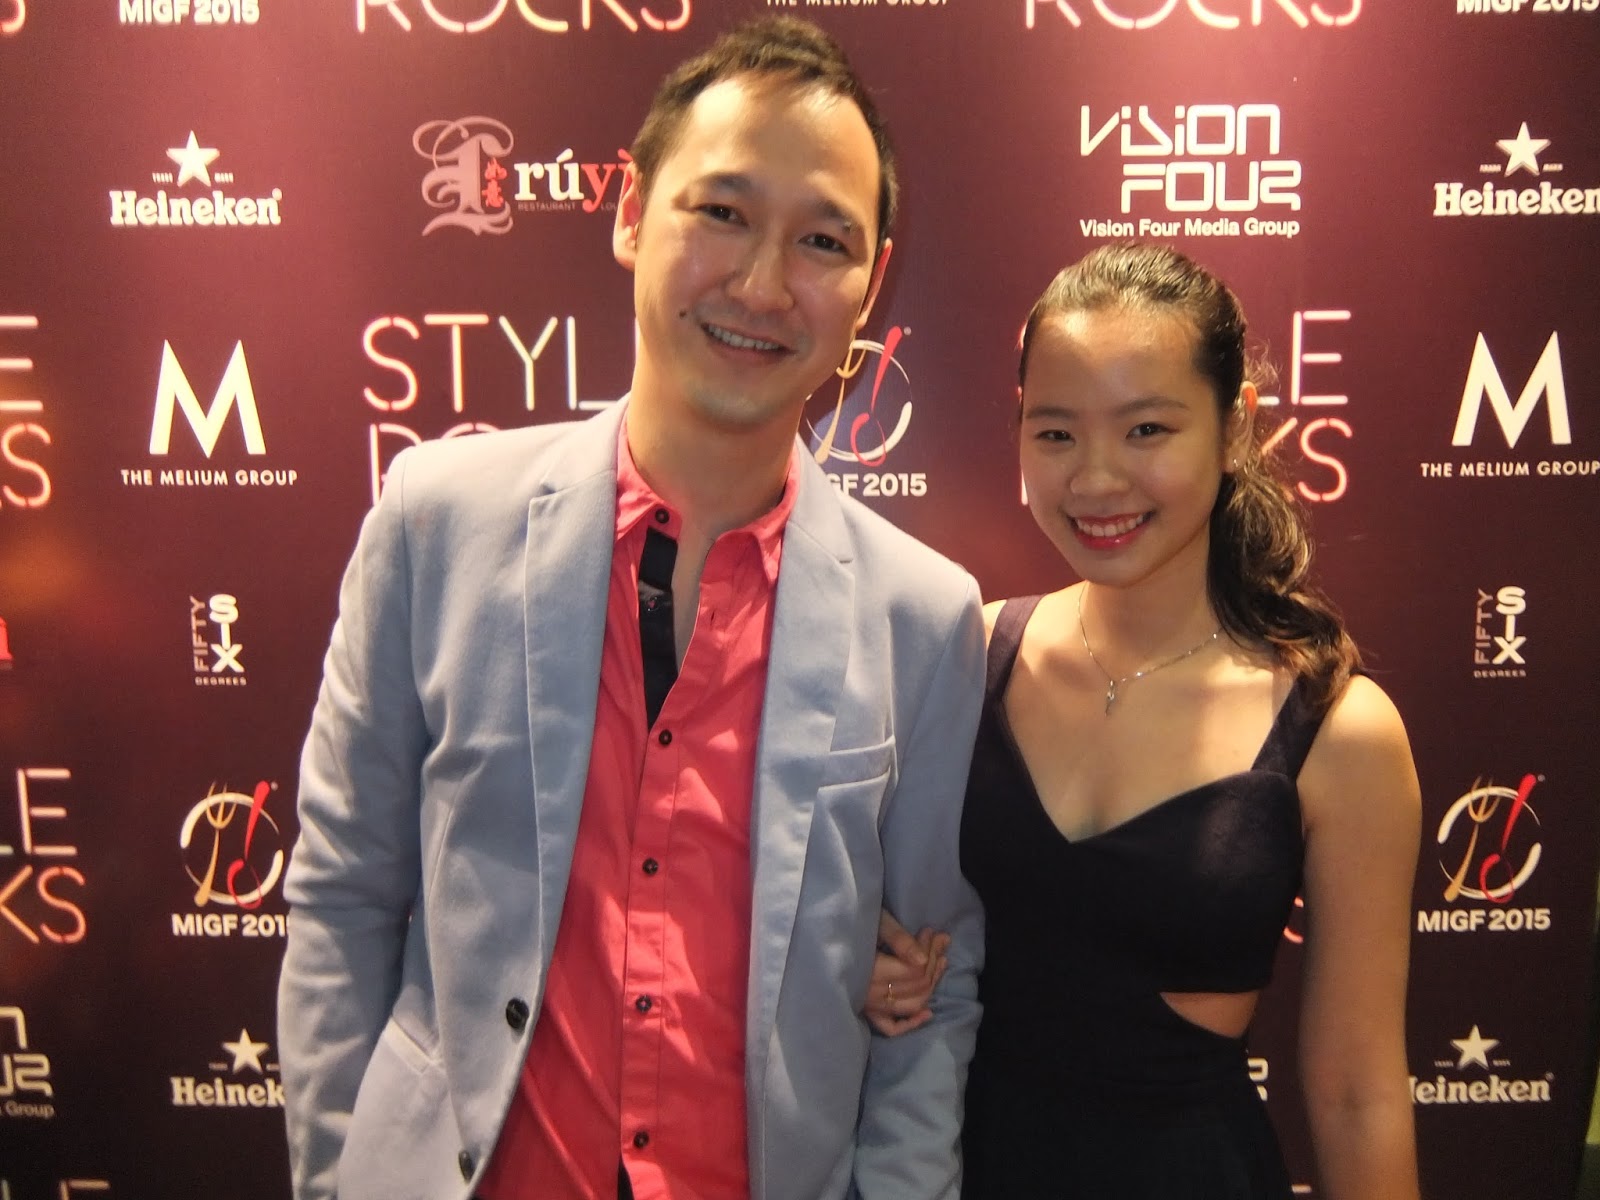 Kee Hua Chee Live!: PART 1---MIGF AND MELIUM GROUP HOSTED 'STYLE ROCKS' AT  RUYI & LYN IN PARTY OF THE YEAR! IT WAS TRULY A ROCKTOBER FASHION AND FOOD  FEST!